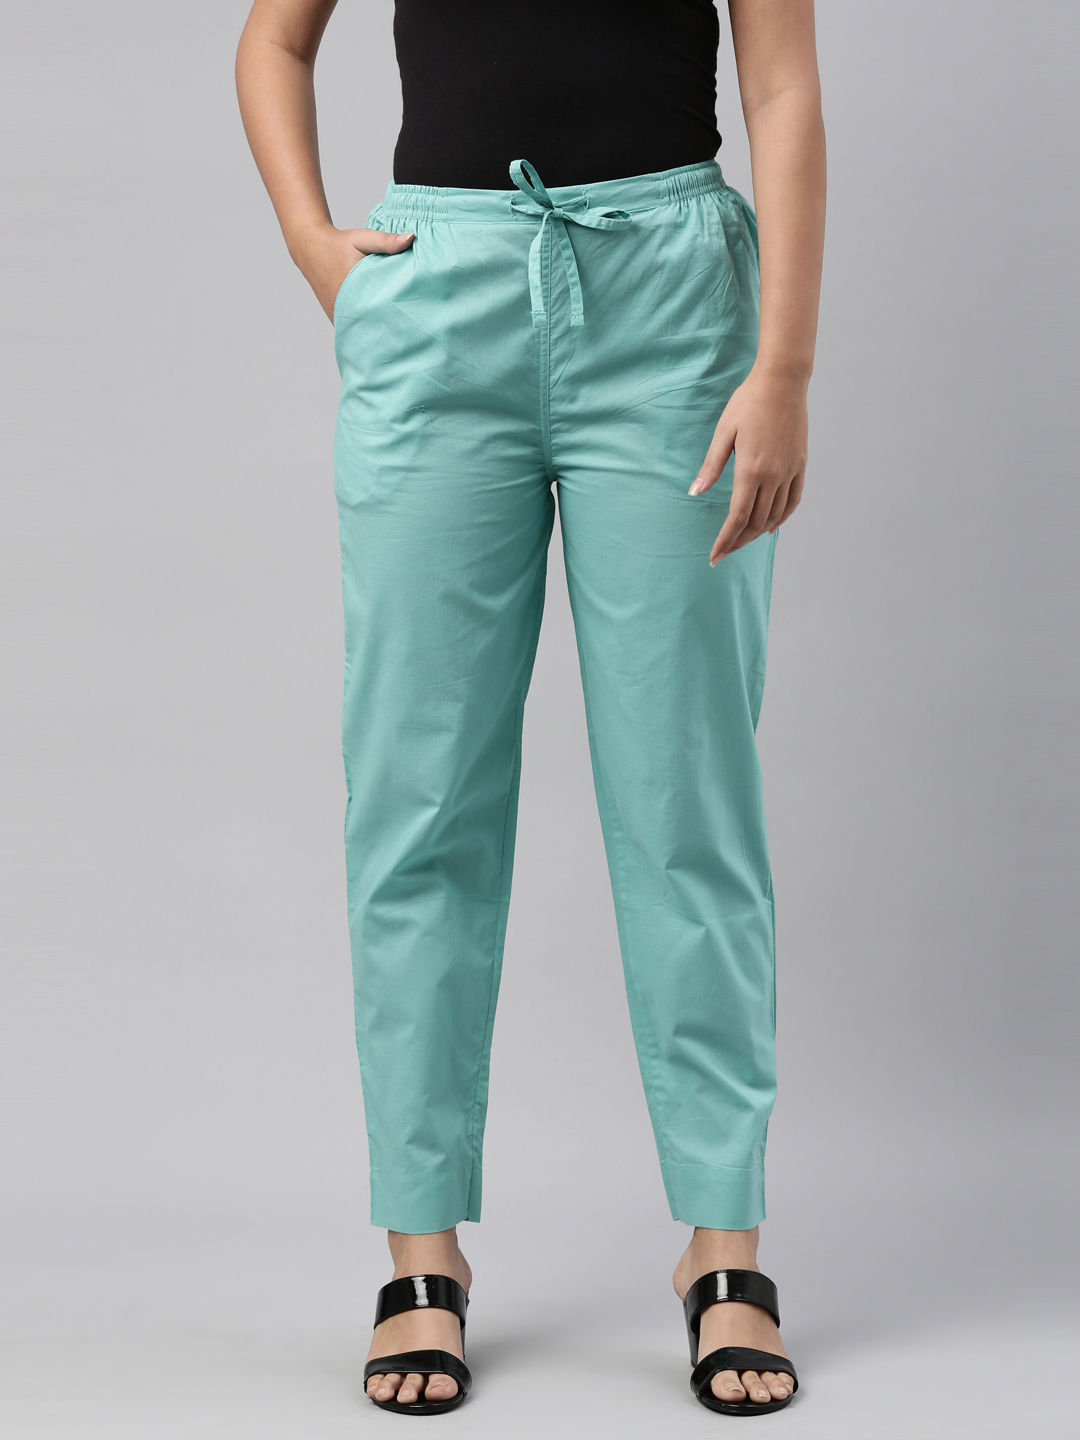 Buy the best quality designer Green pants for women in india